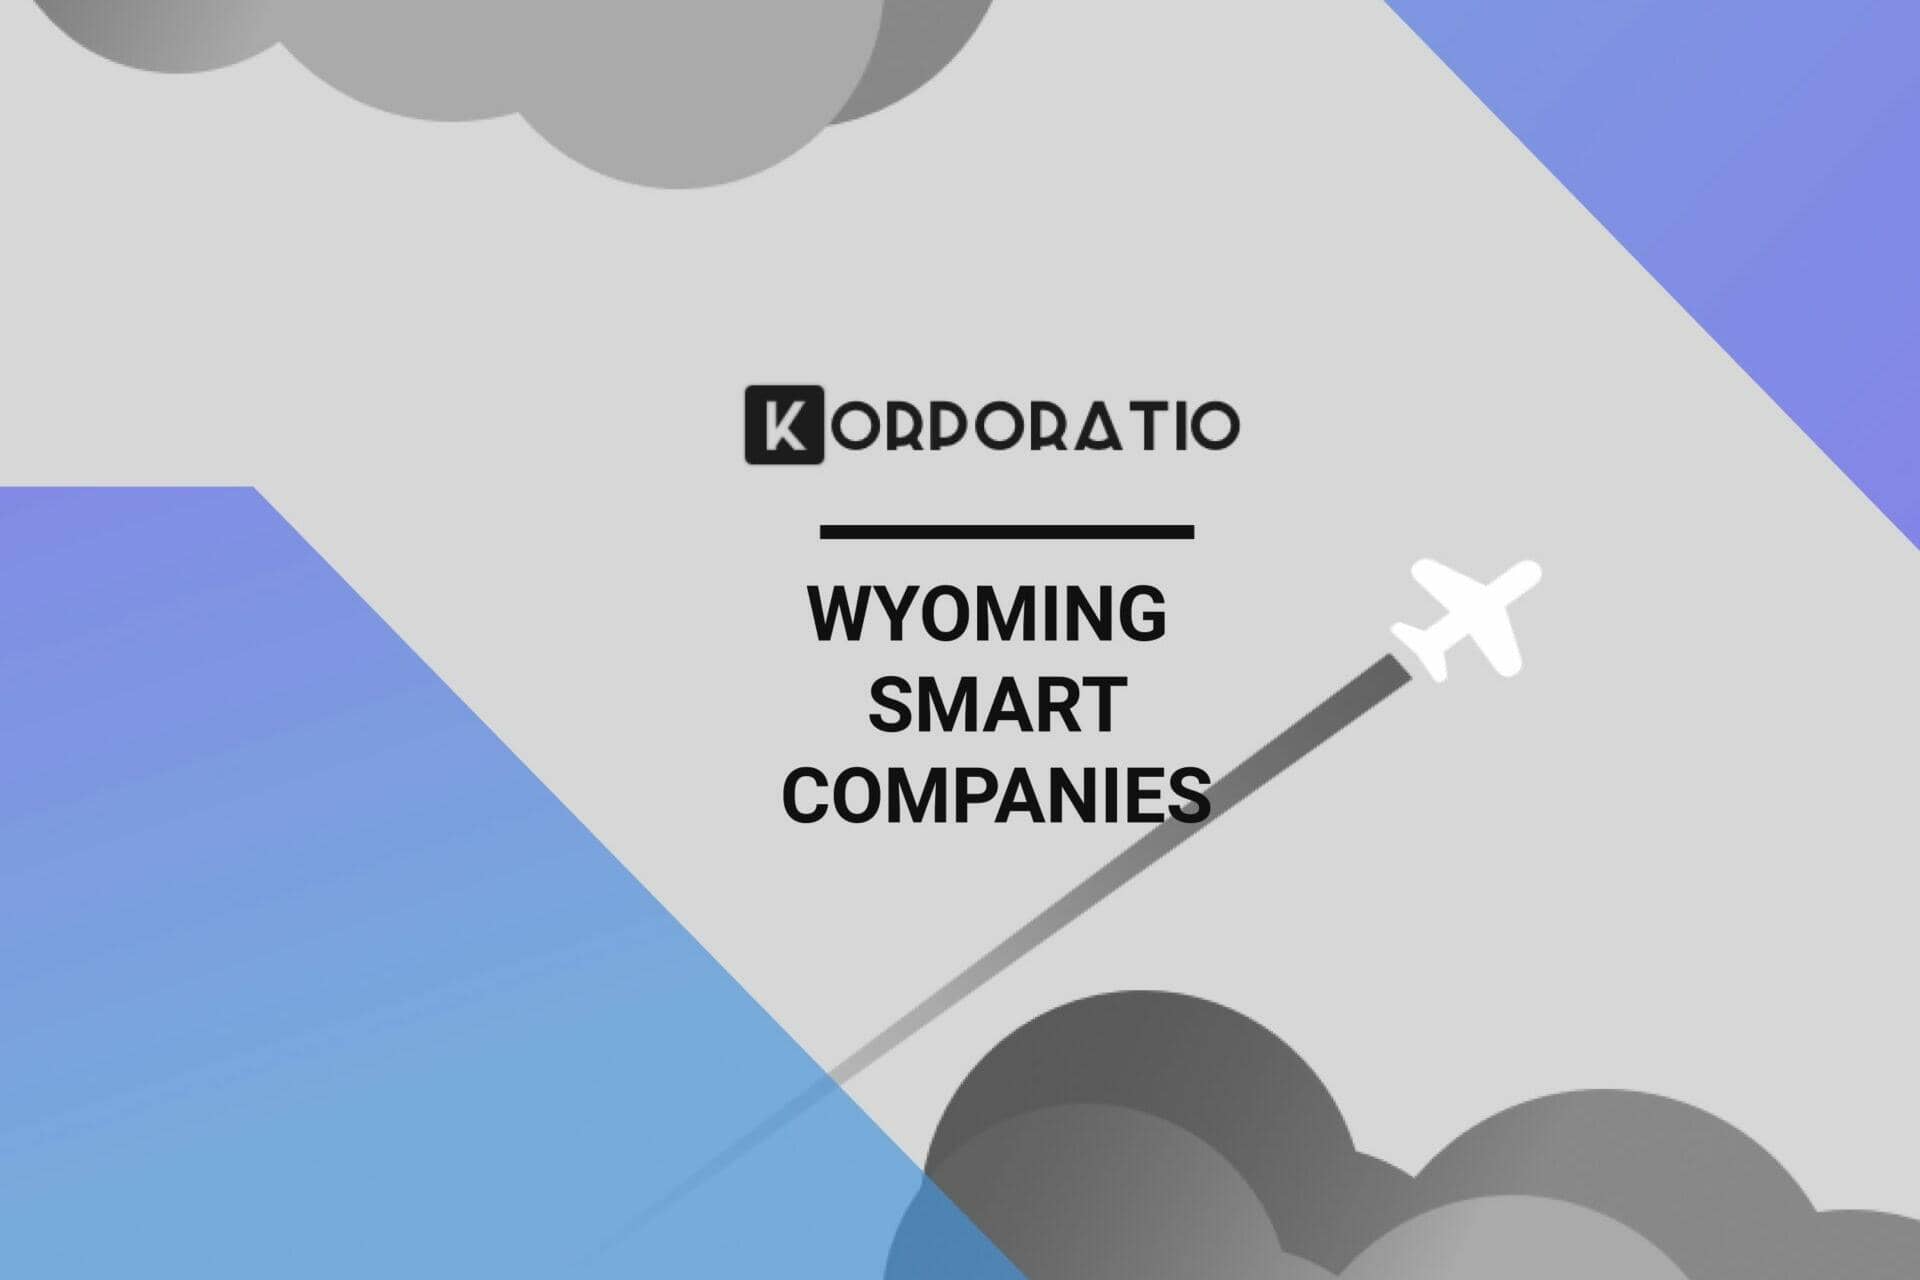 incorporate in wyoming